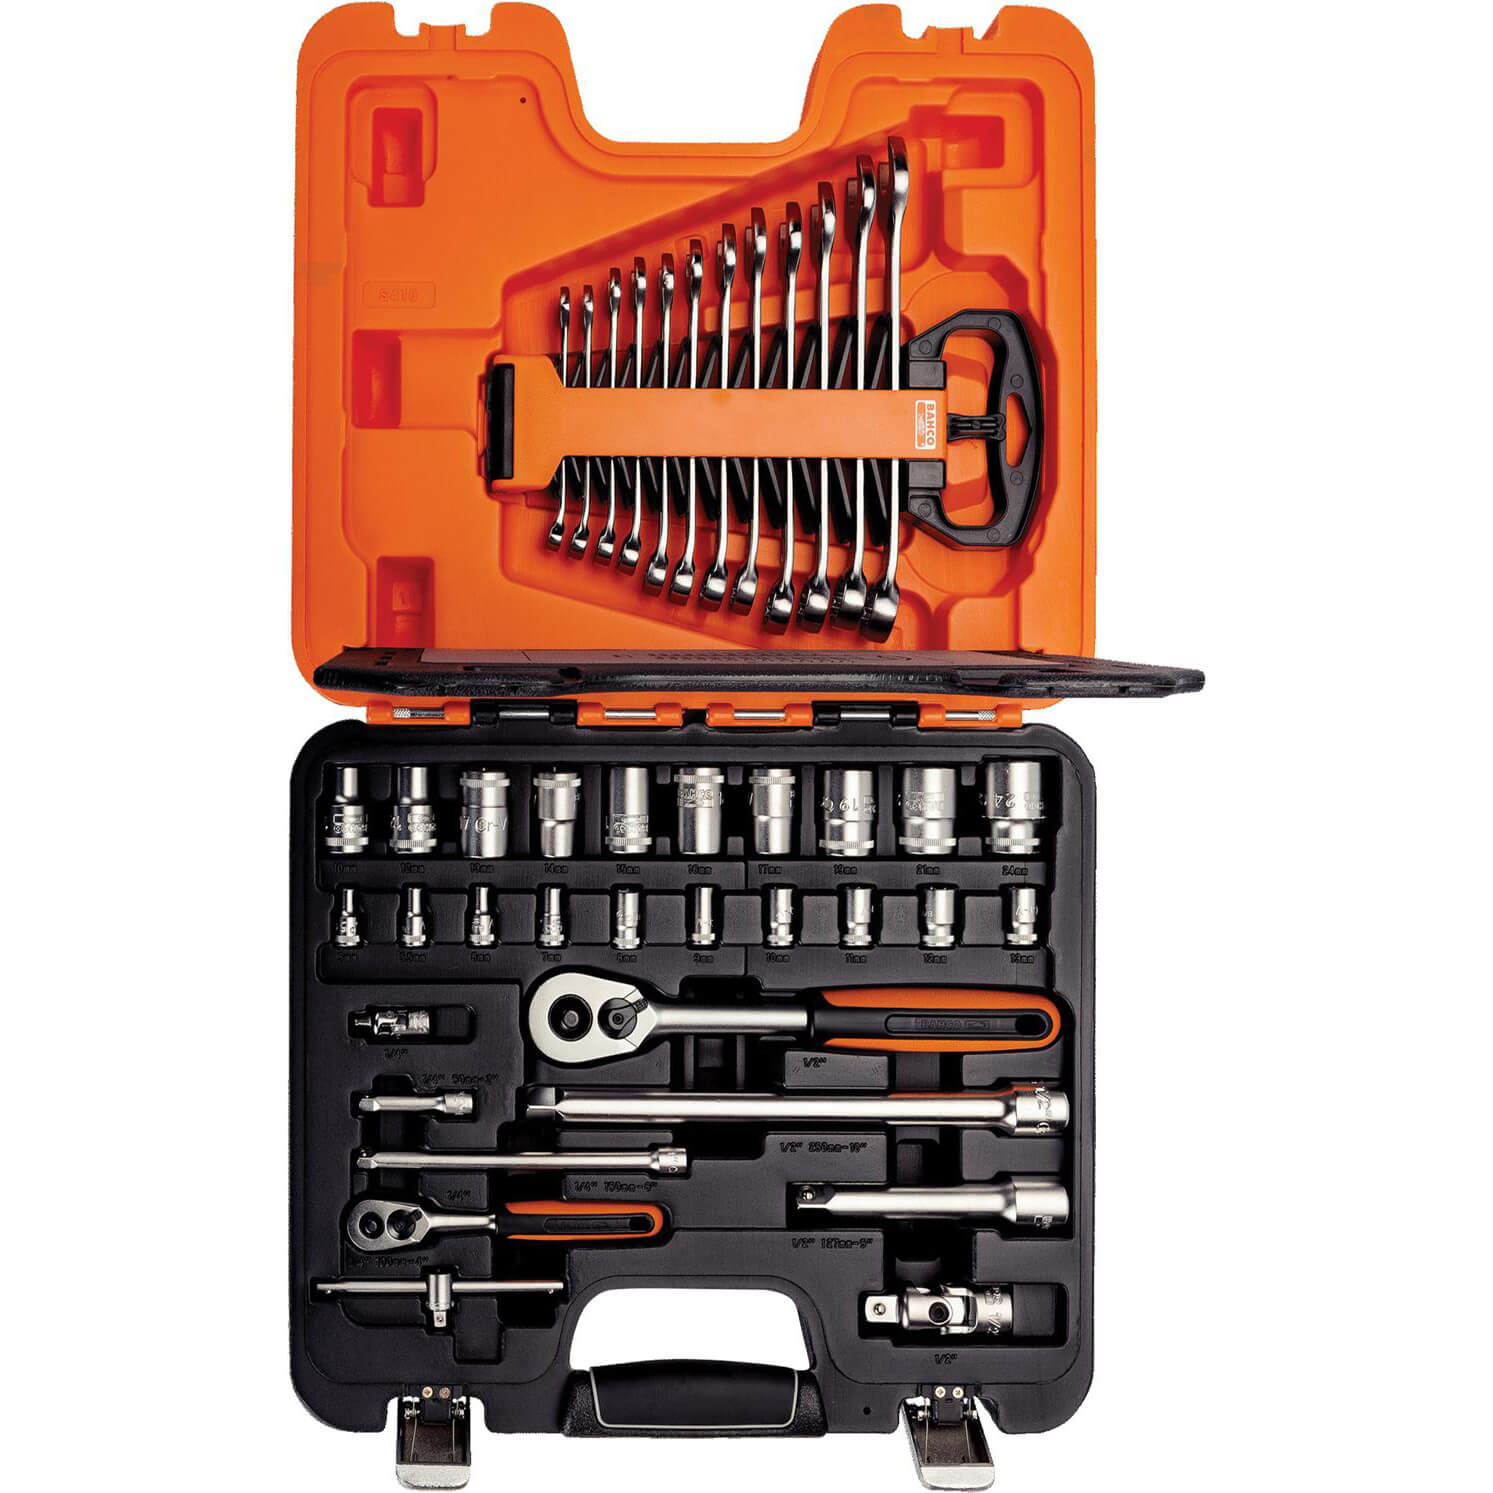 Bahco 41 Piece Combination 1/4" & 1/2" Square Drive Socket & Spanner Set Metric